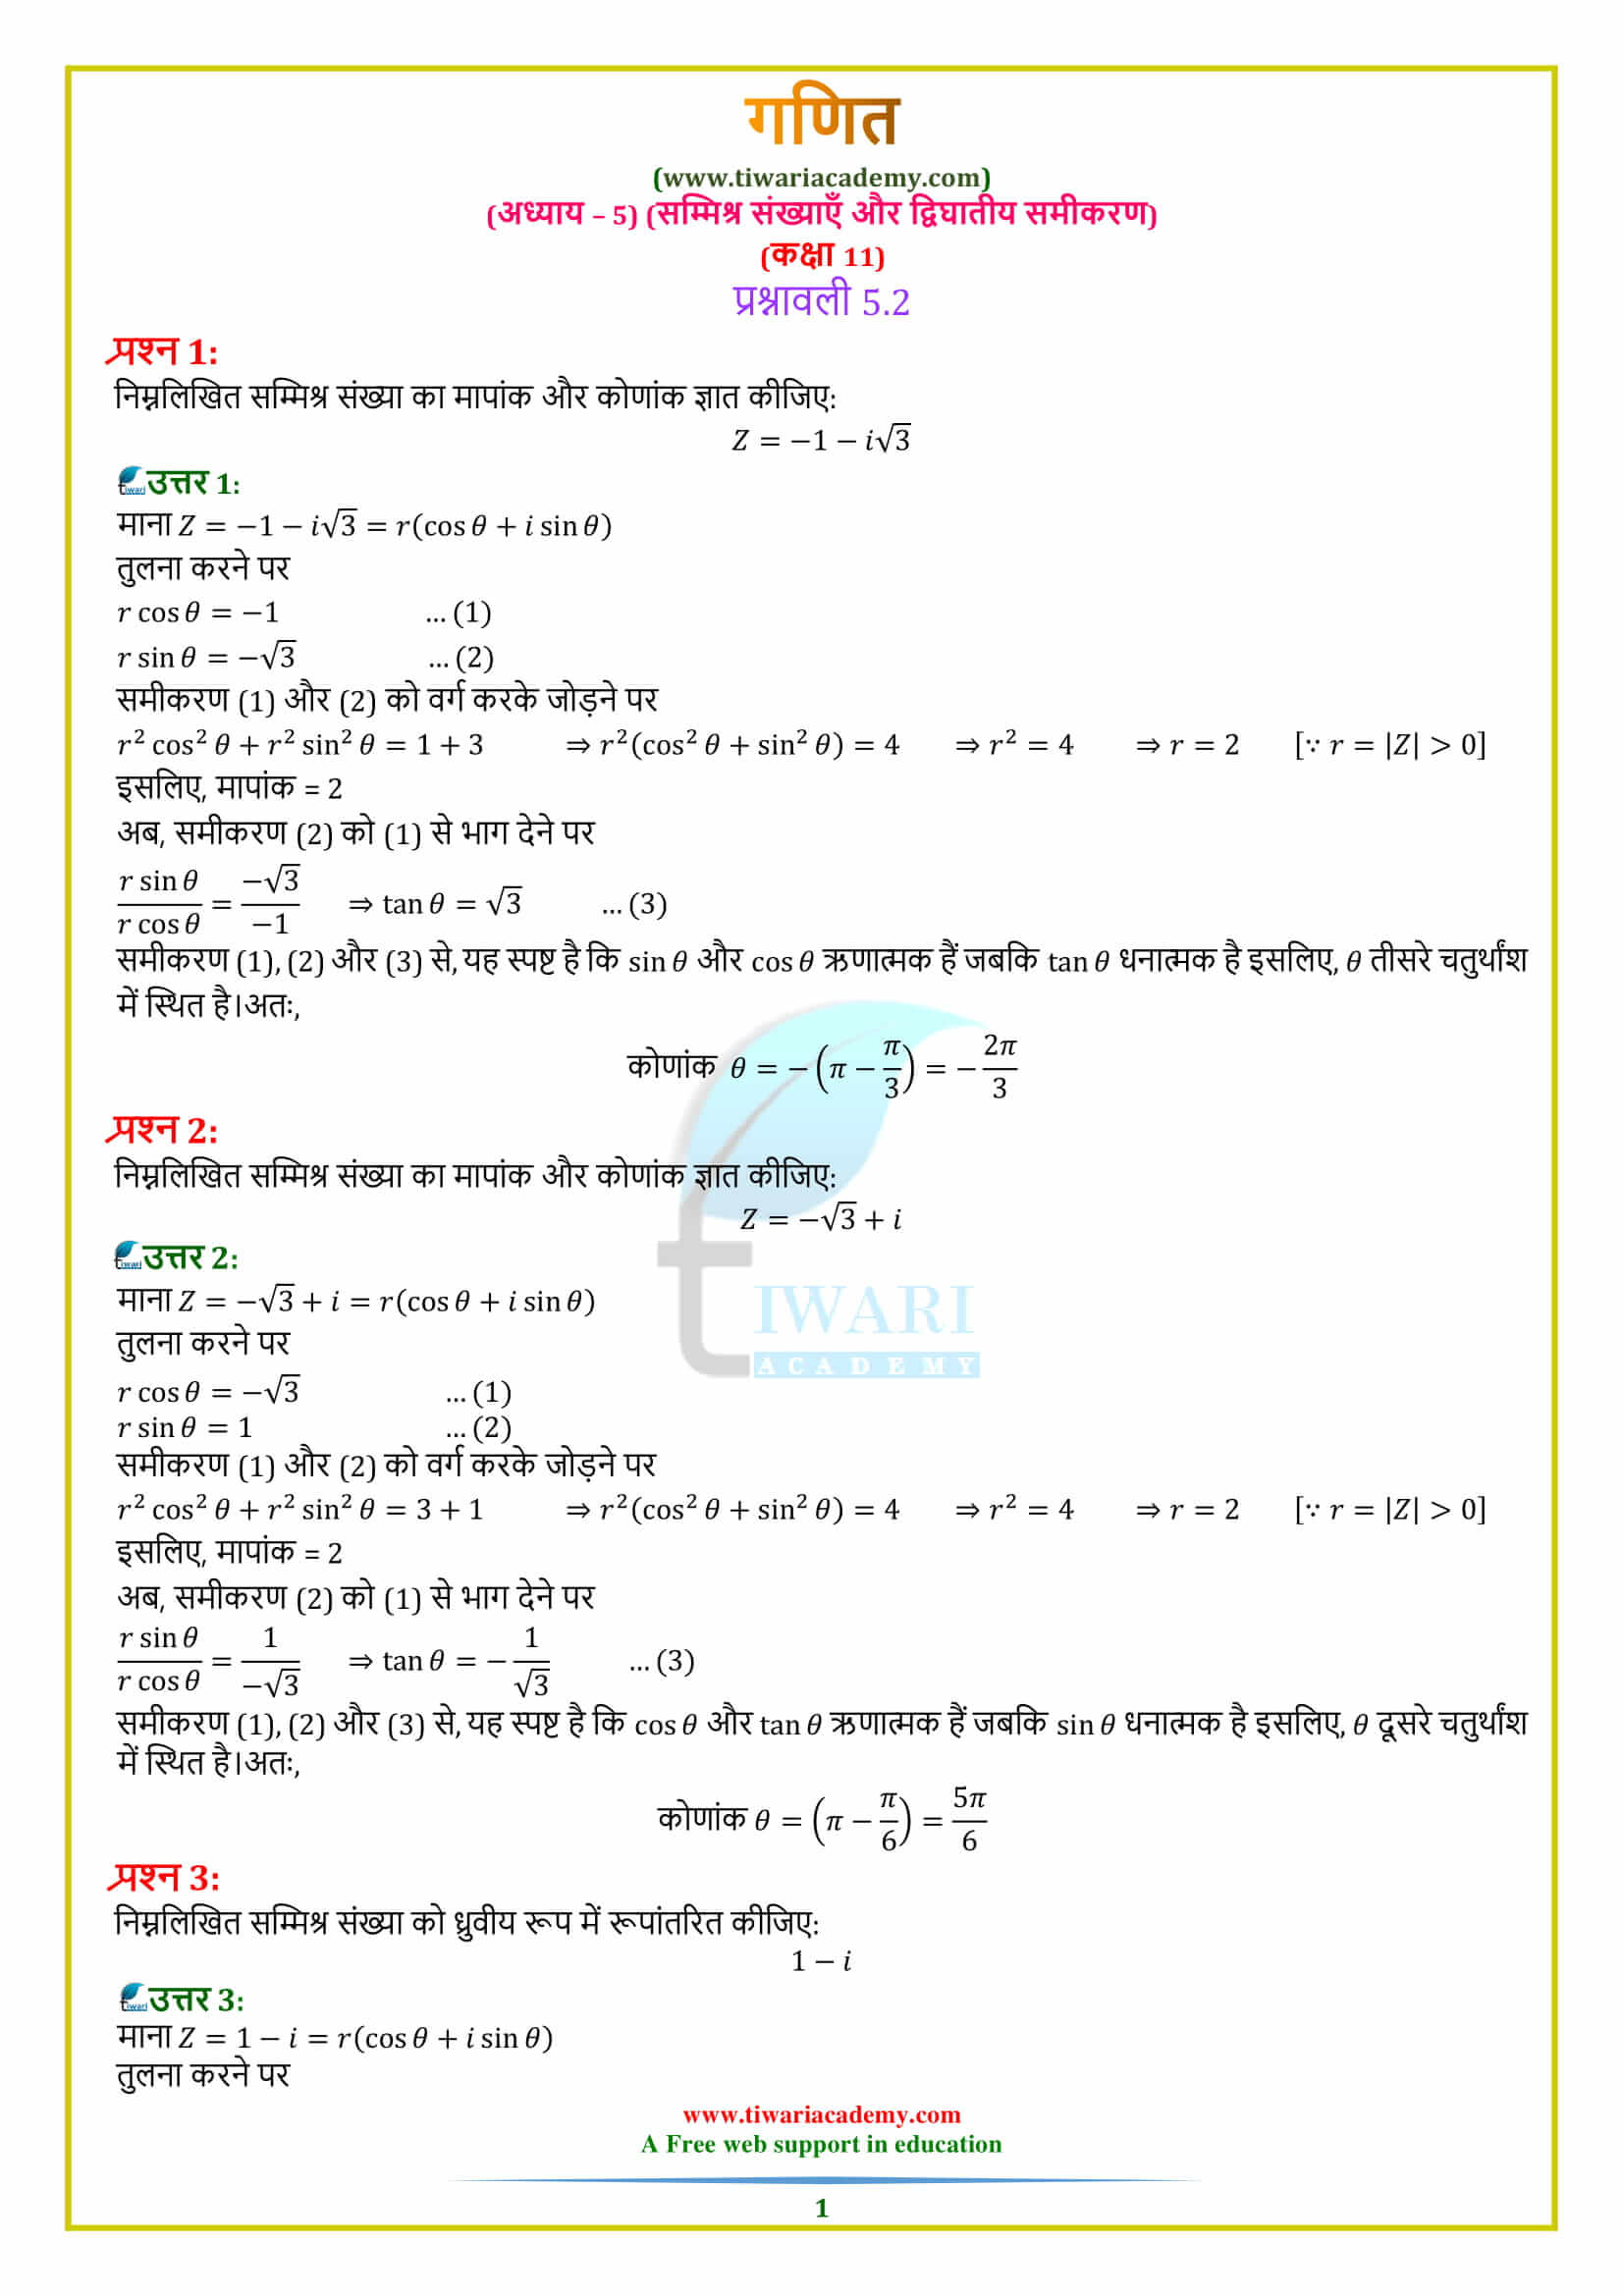 11 Maths Chapter 5 Exercise 5.2 solutions in Hindi